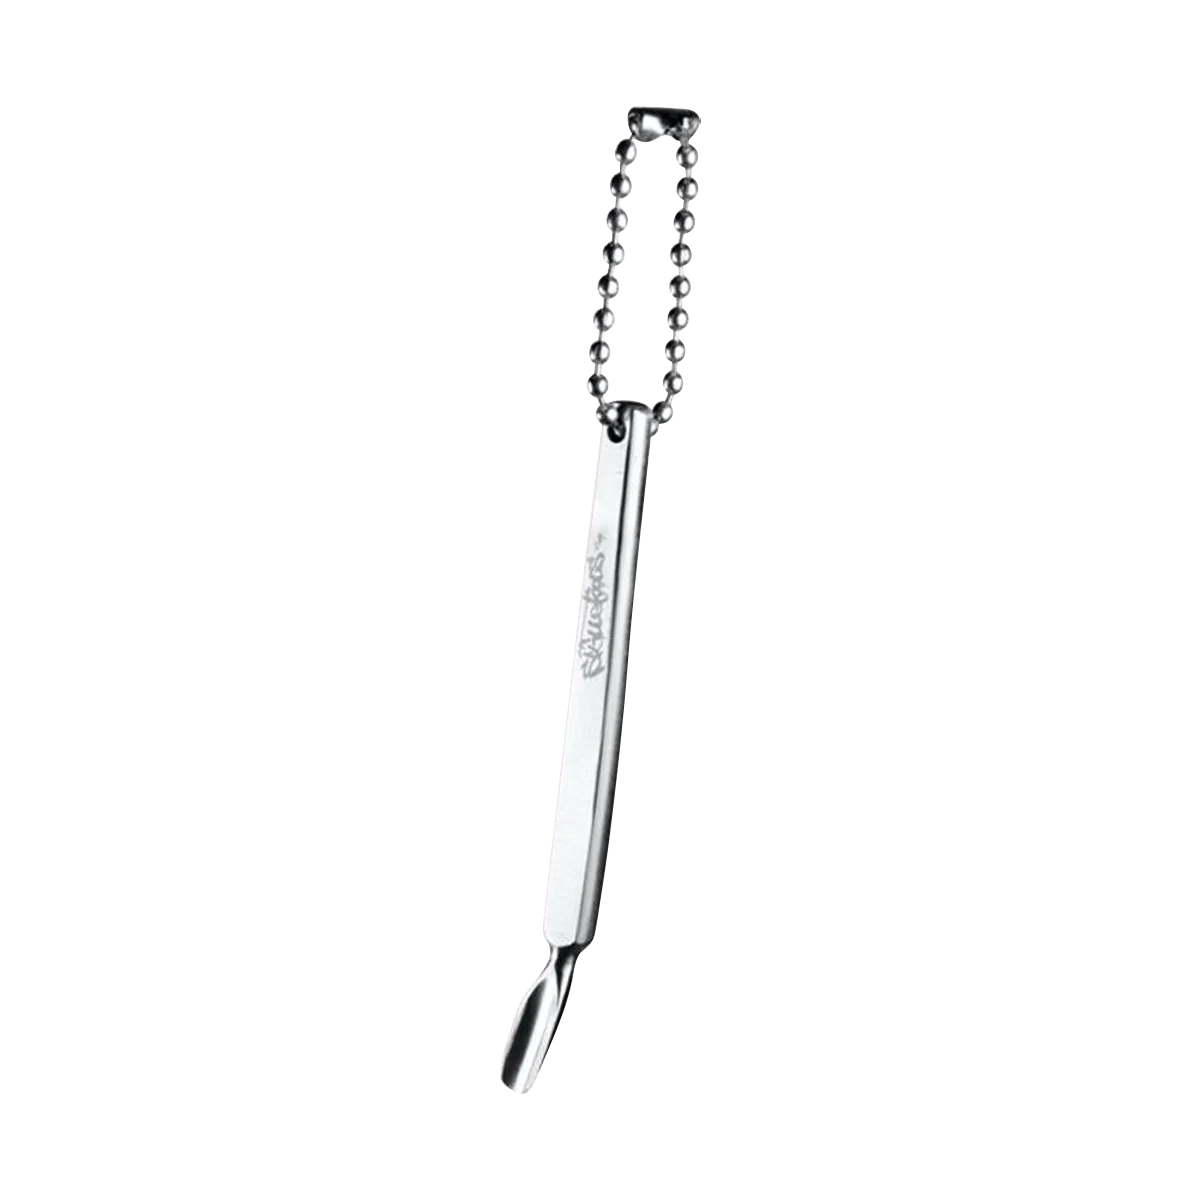 Skilletools Classic Series MINI Dab Tool in silver with keychain, angled view on white background